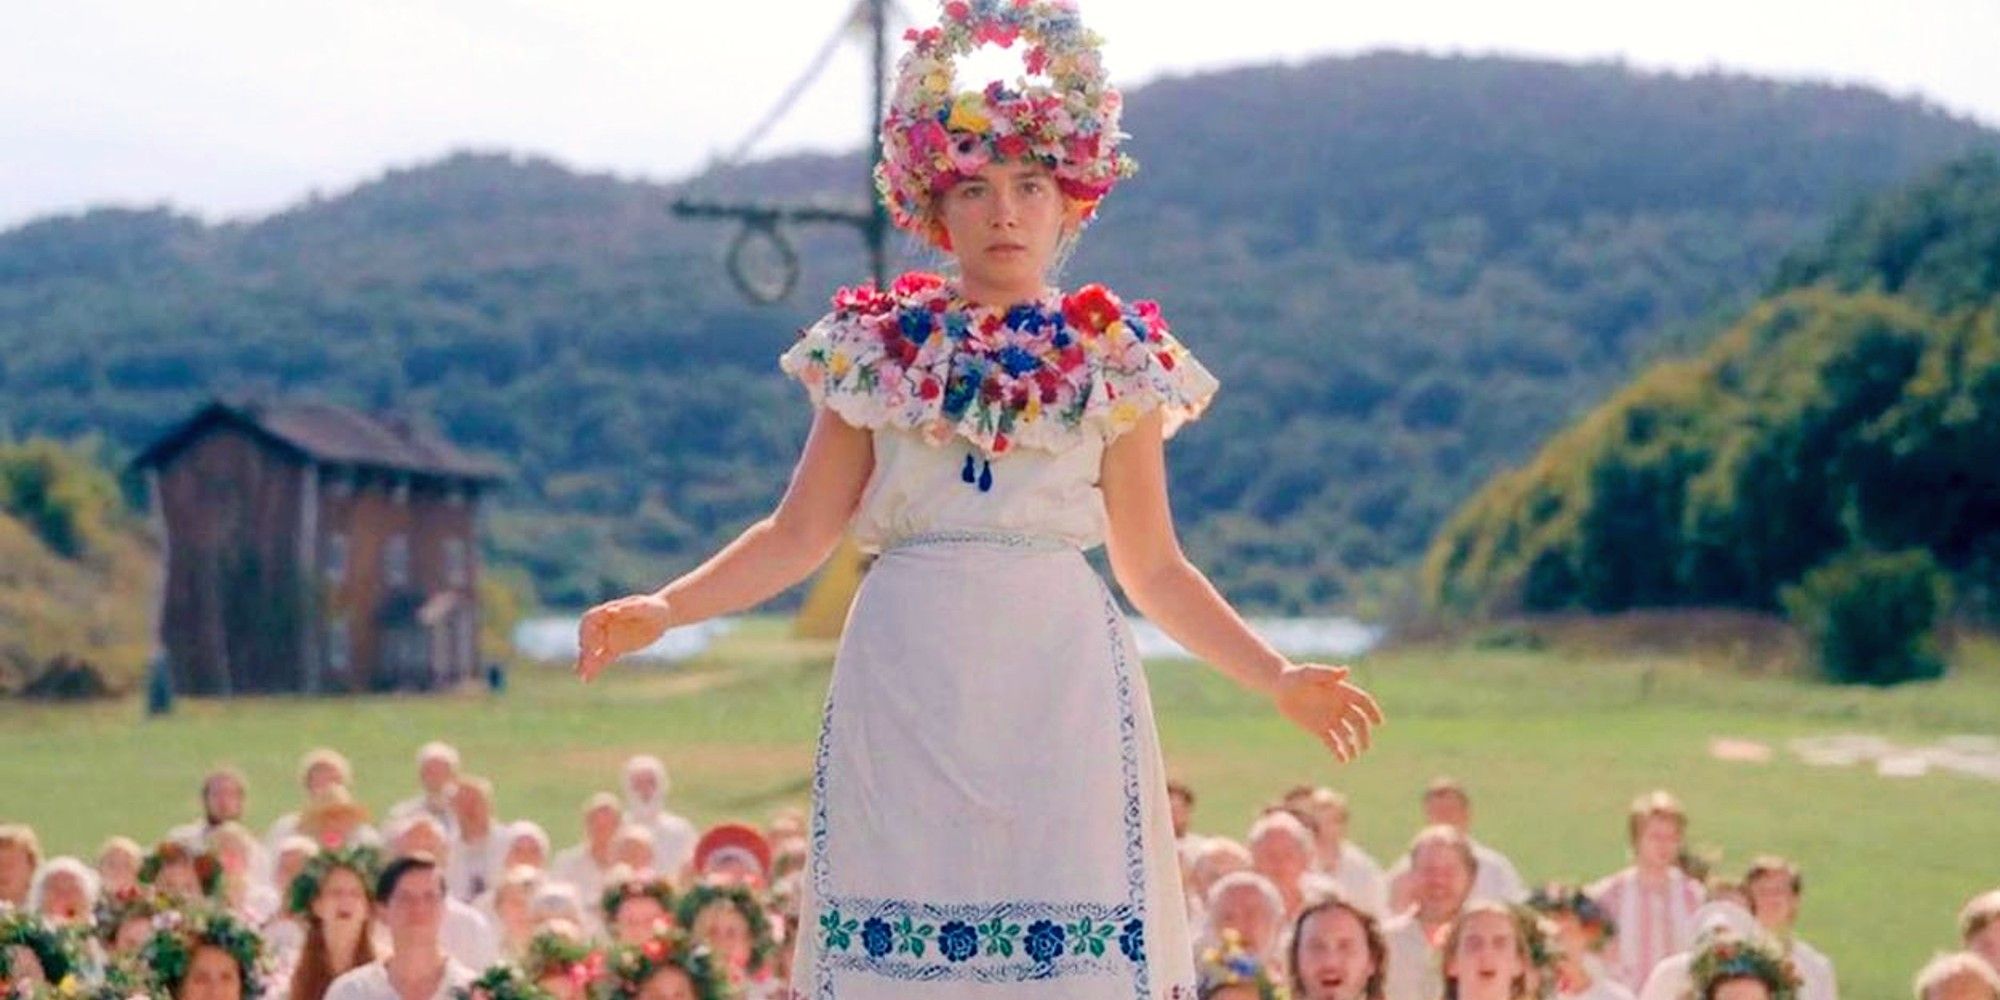 Dani Ardor as the Queen of May in the summer solstice festivity